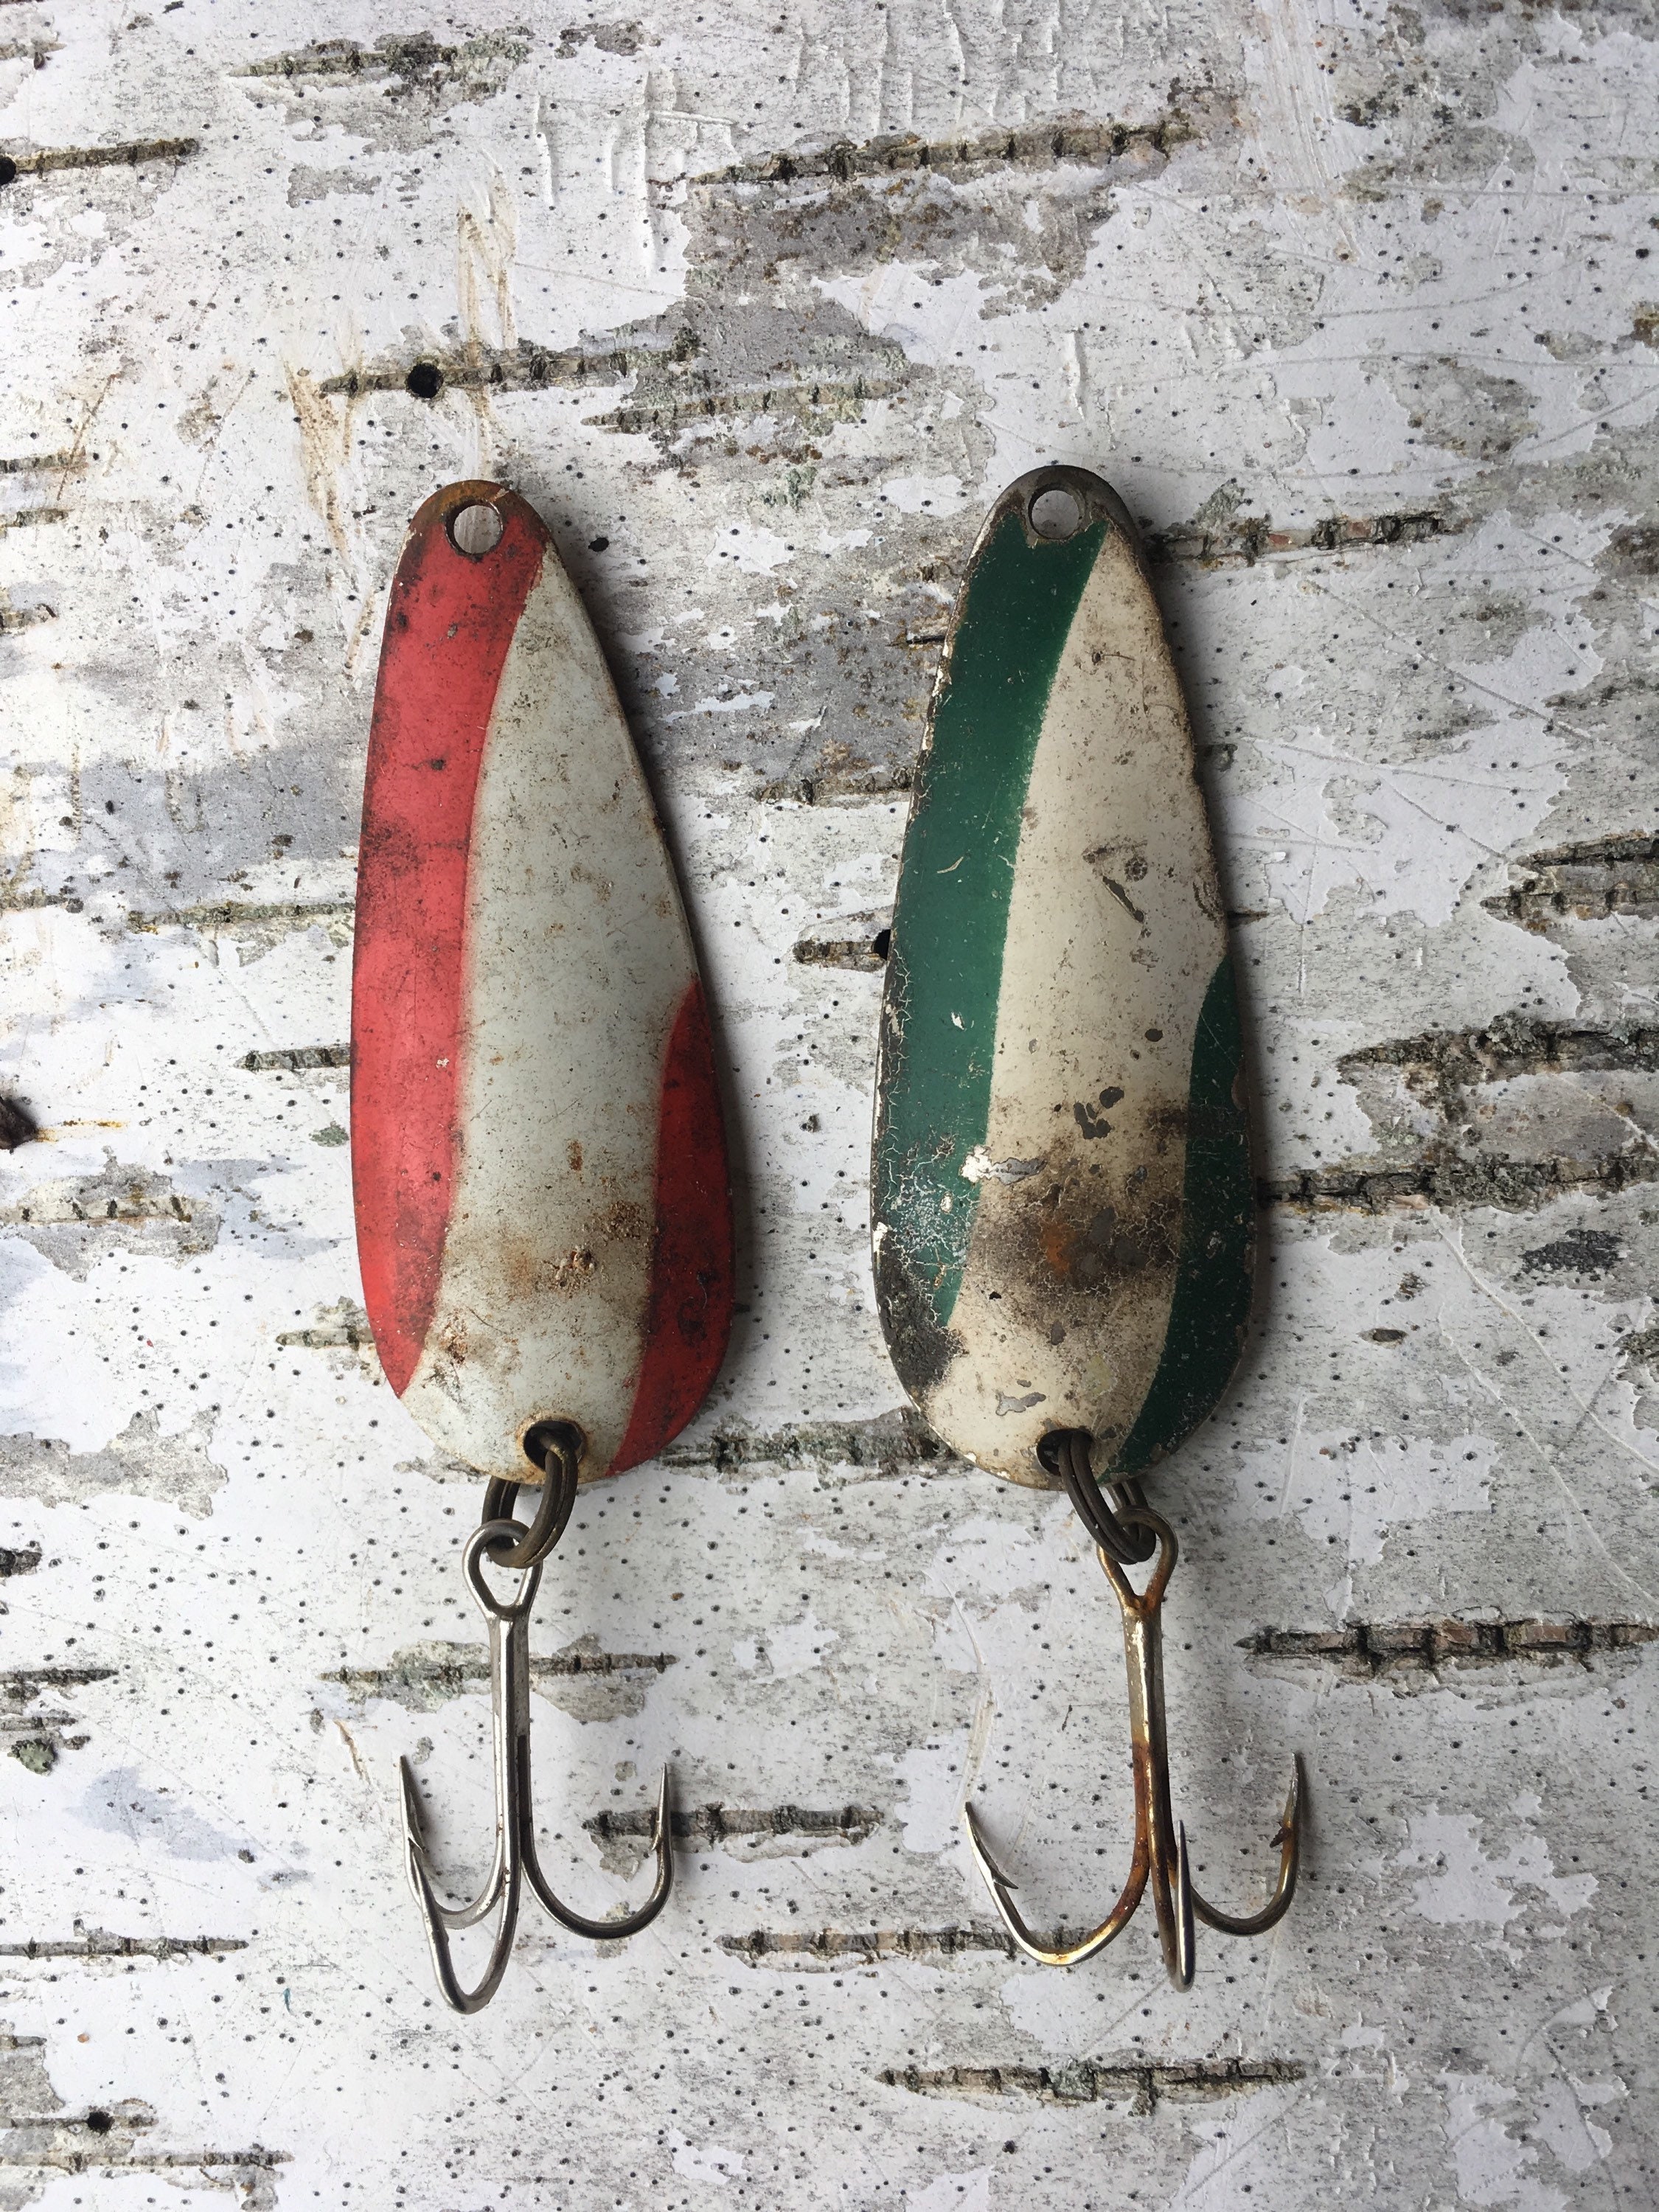 Daredevil Lure Fishing Set Spoon Lot Nebco Fish Old Antique Vintage Cabin  Metal Red White Green Flash Bait Aqua Small Pike LOT F 